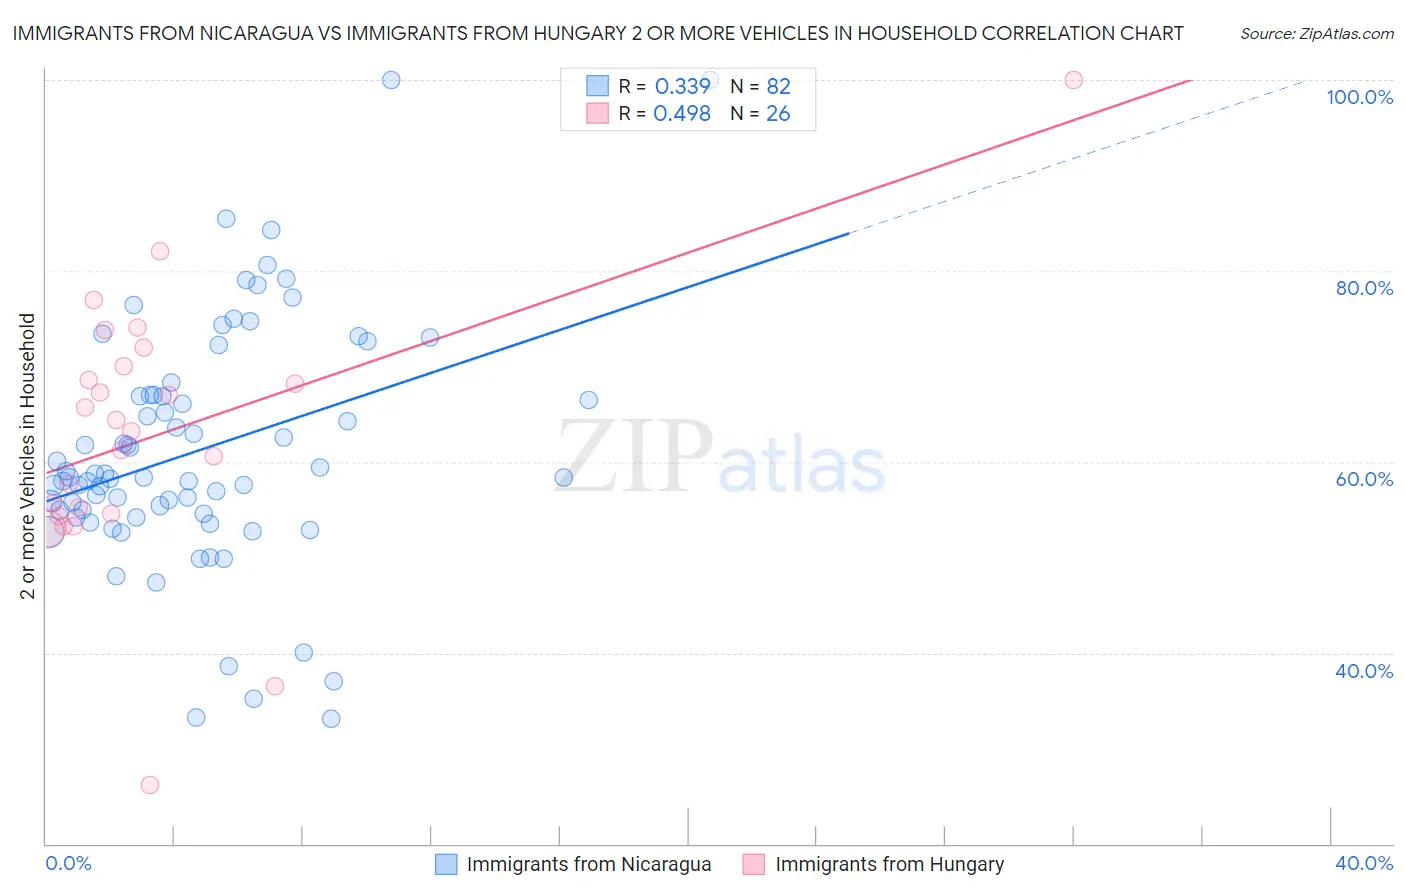 Immigrants from Nicaragua vs Immigrants from Hungary 2 or more Vehicles in Household